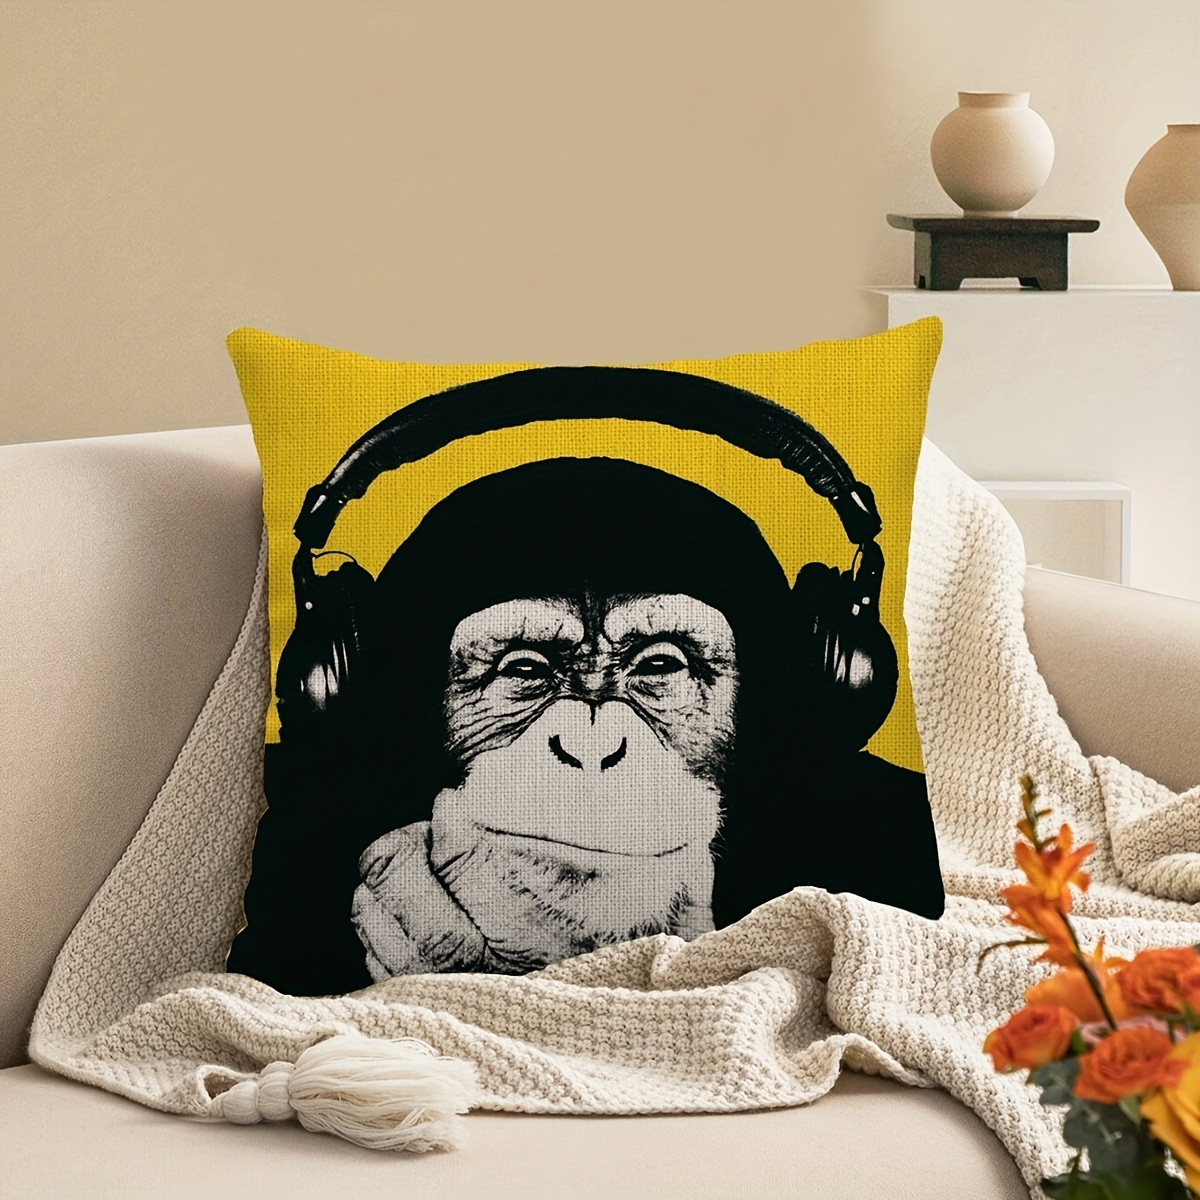 gorilla and her baby Throw Pillow